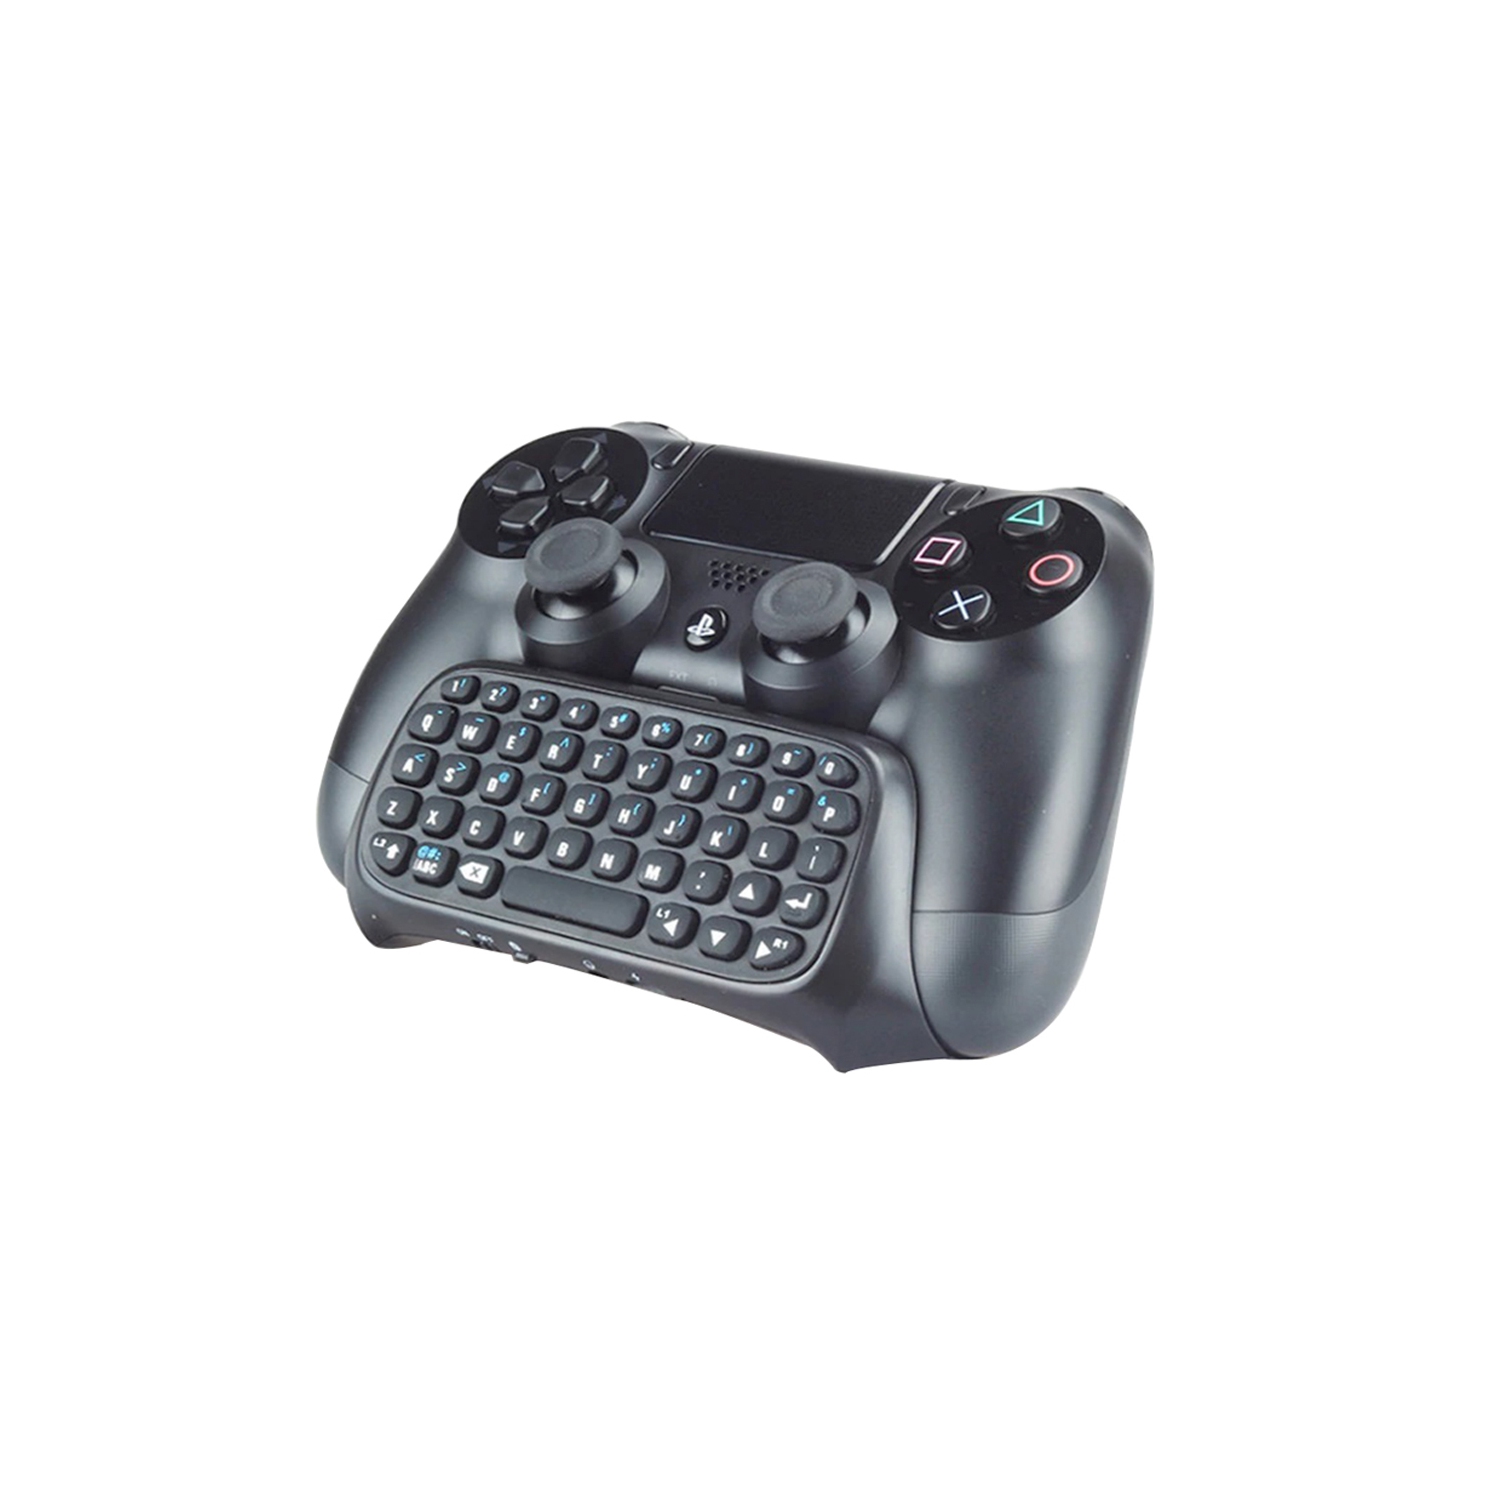 Wireless Bluetooth Game Messenger Chatpad Keyboard Keypad Text Pad For Sony PlayStation 4 PS4 Pro Slim DualShock DS4 Controller V1 V2